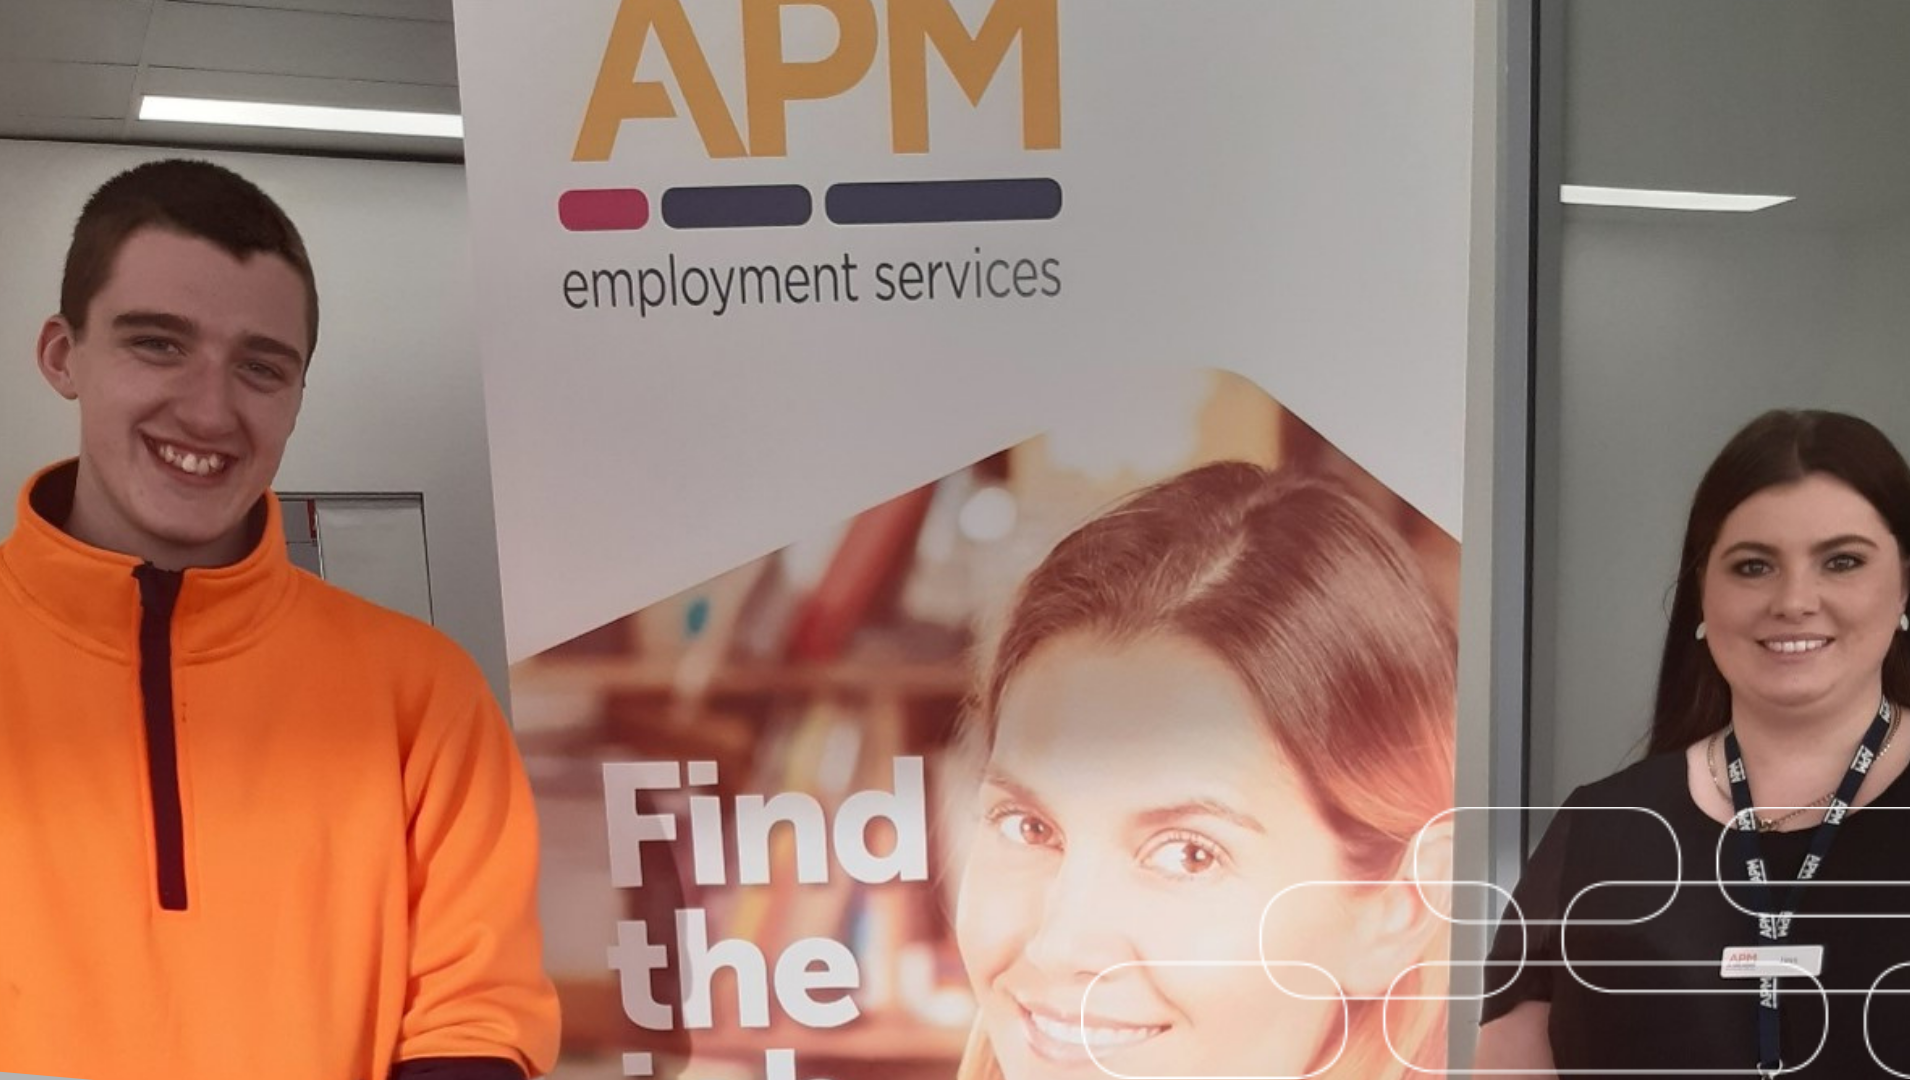 Brandon standing next to an APM banner, with his employment consultant Jess, smiling